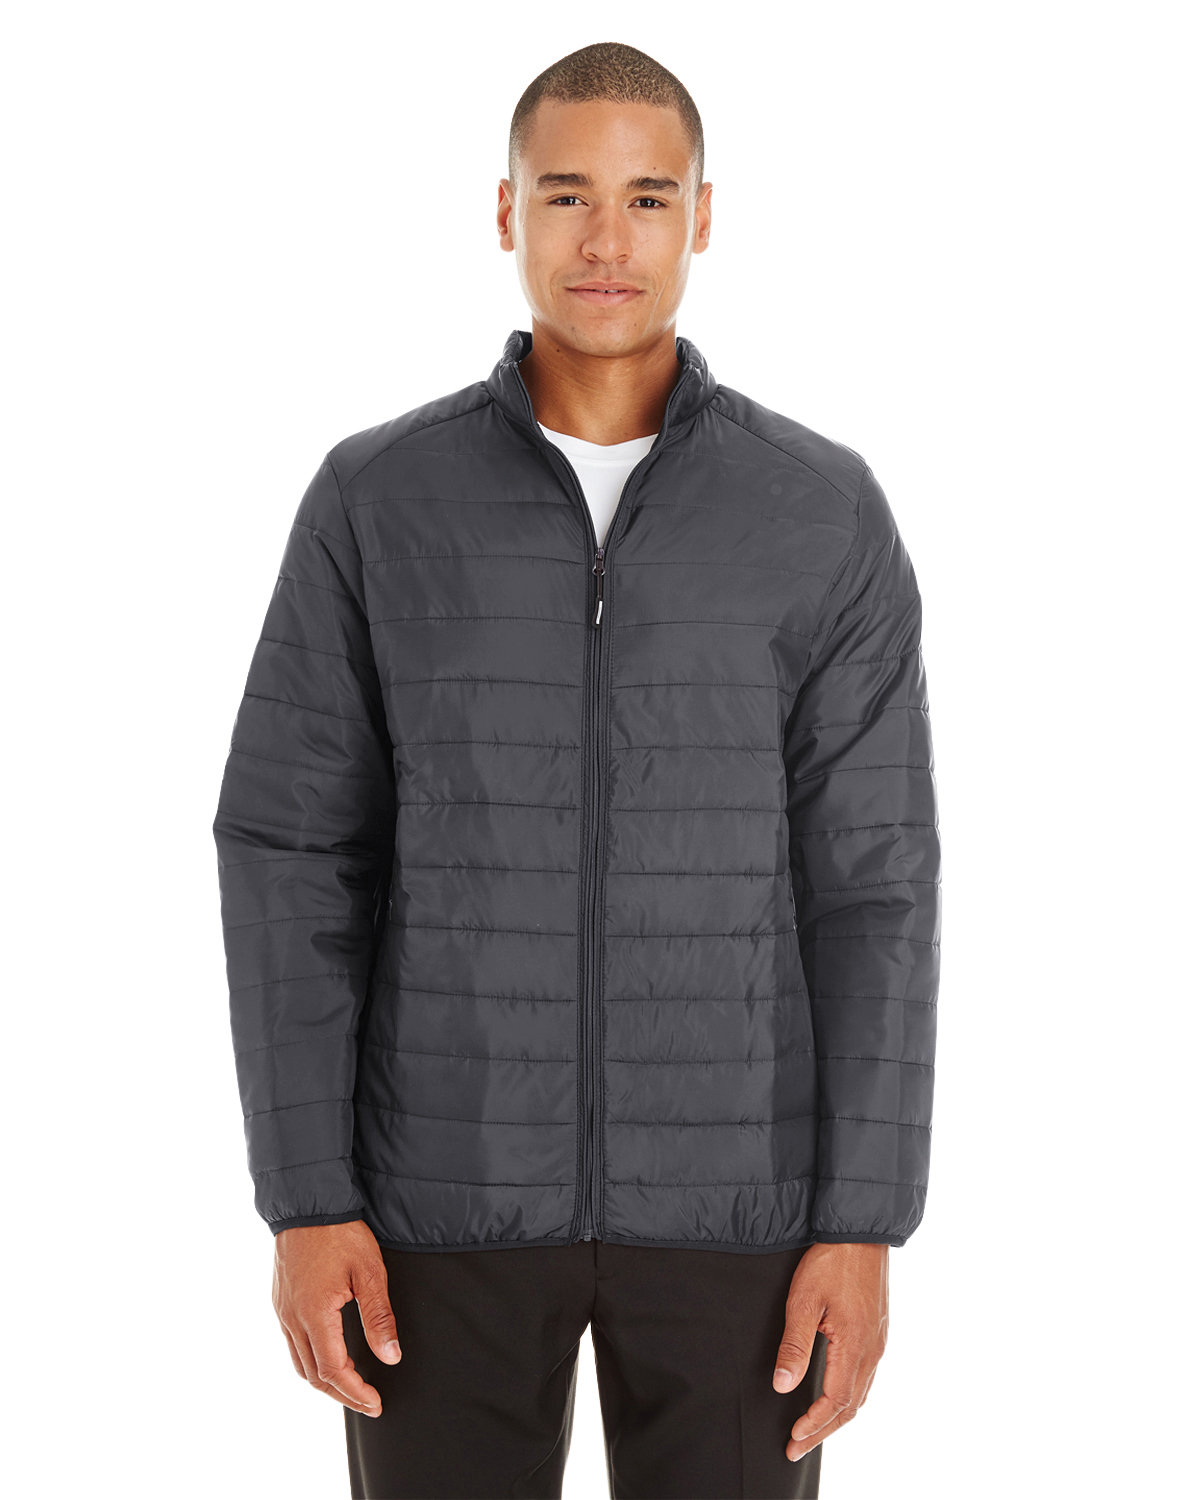 CORE365 Men's Tall Prevail Packable Puffer carbon 